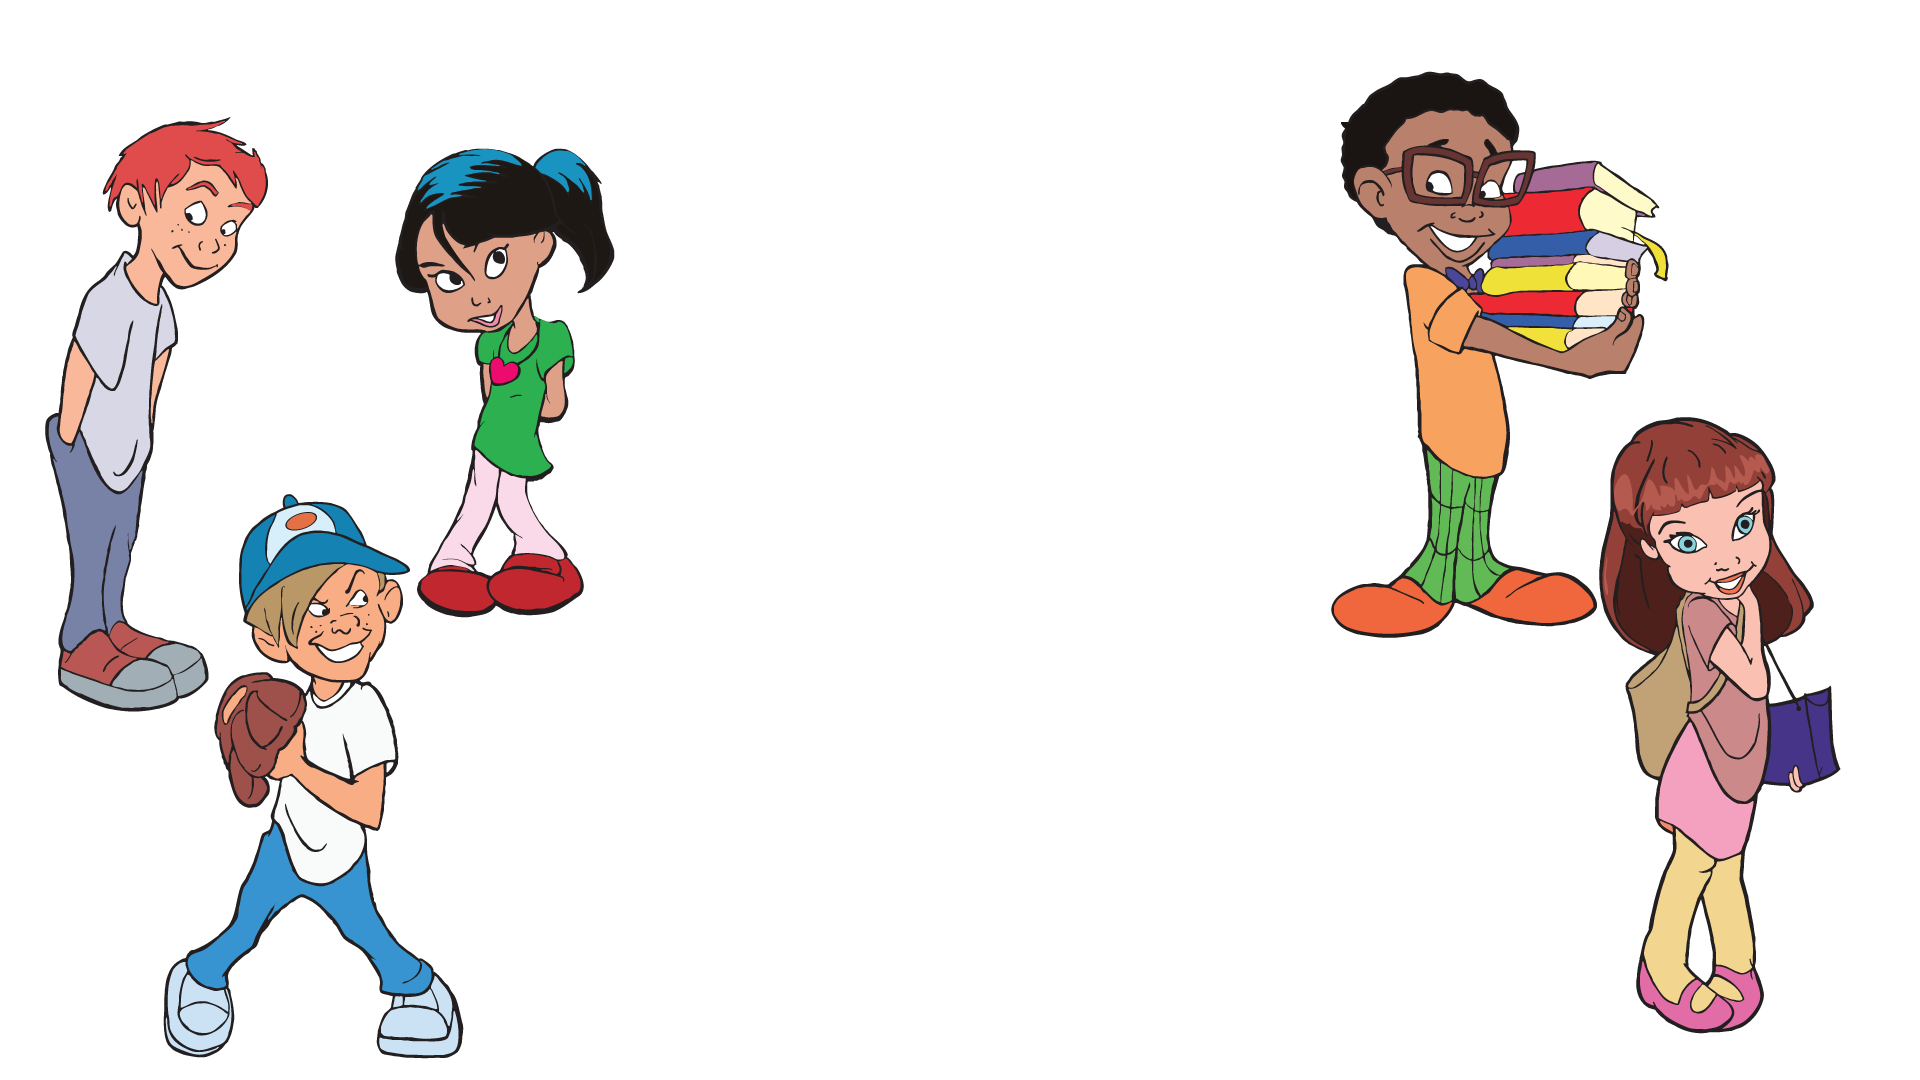 YES - Kids can Conserve